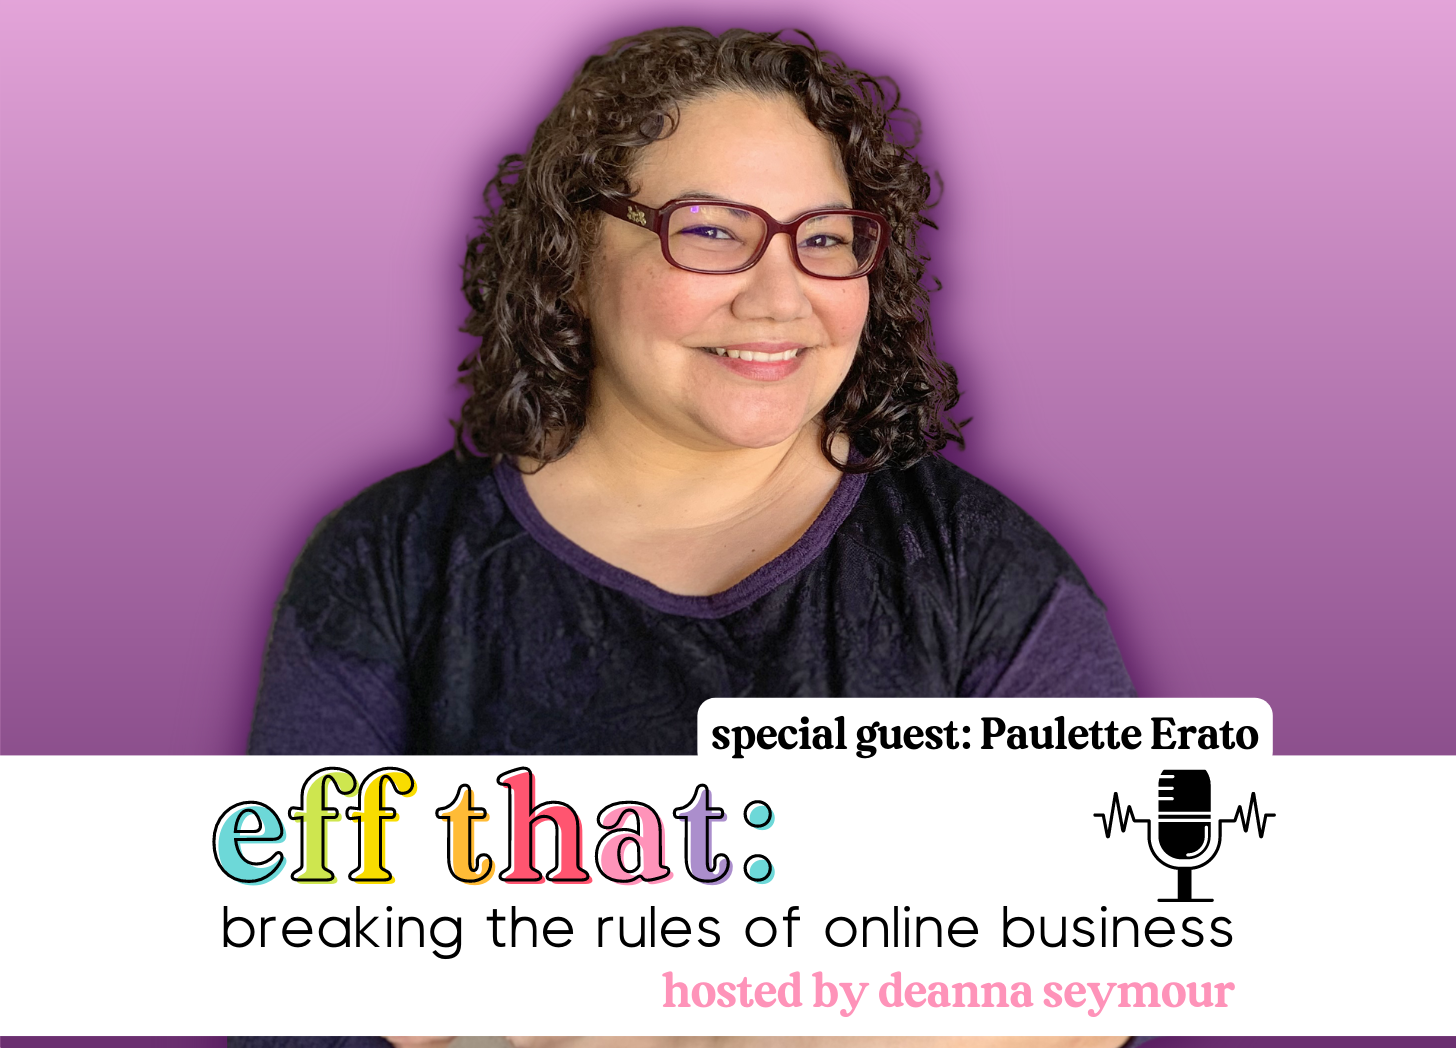 Paulette Erato in a purple and black top on a purple background. The text reads: Eff That: breaking the rules of online business hosted by Deanna Seymour